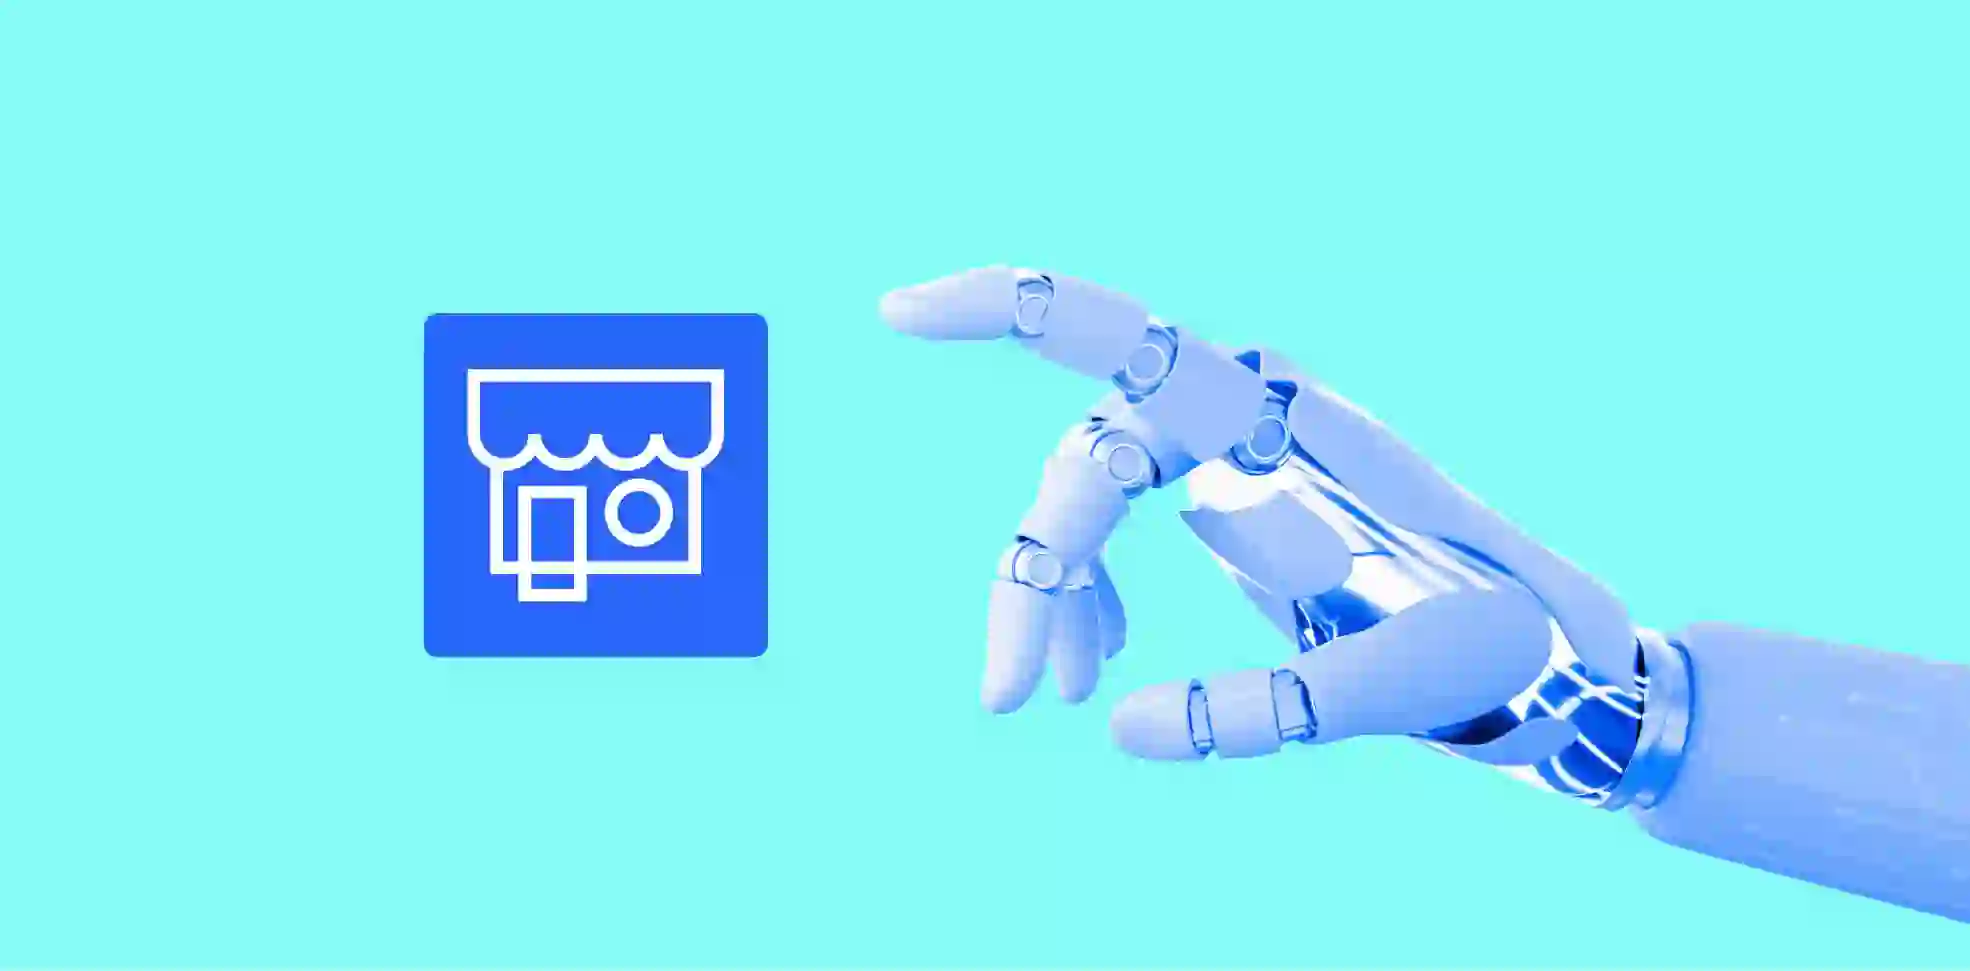 robot hand pointing to icon on green background